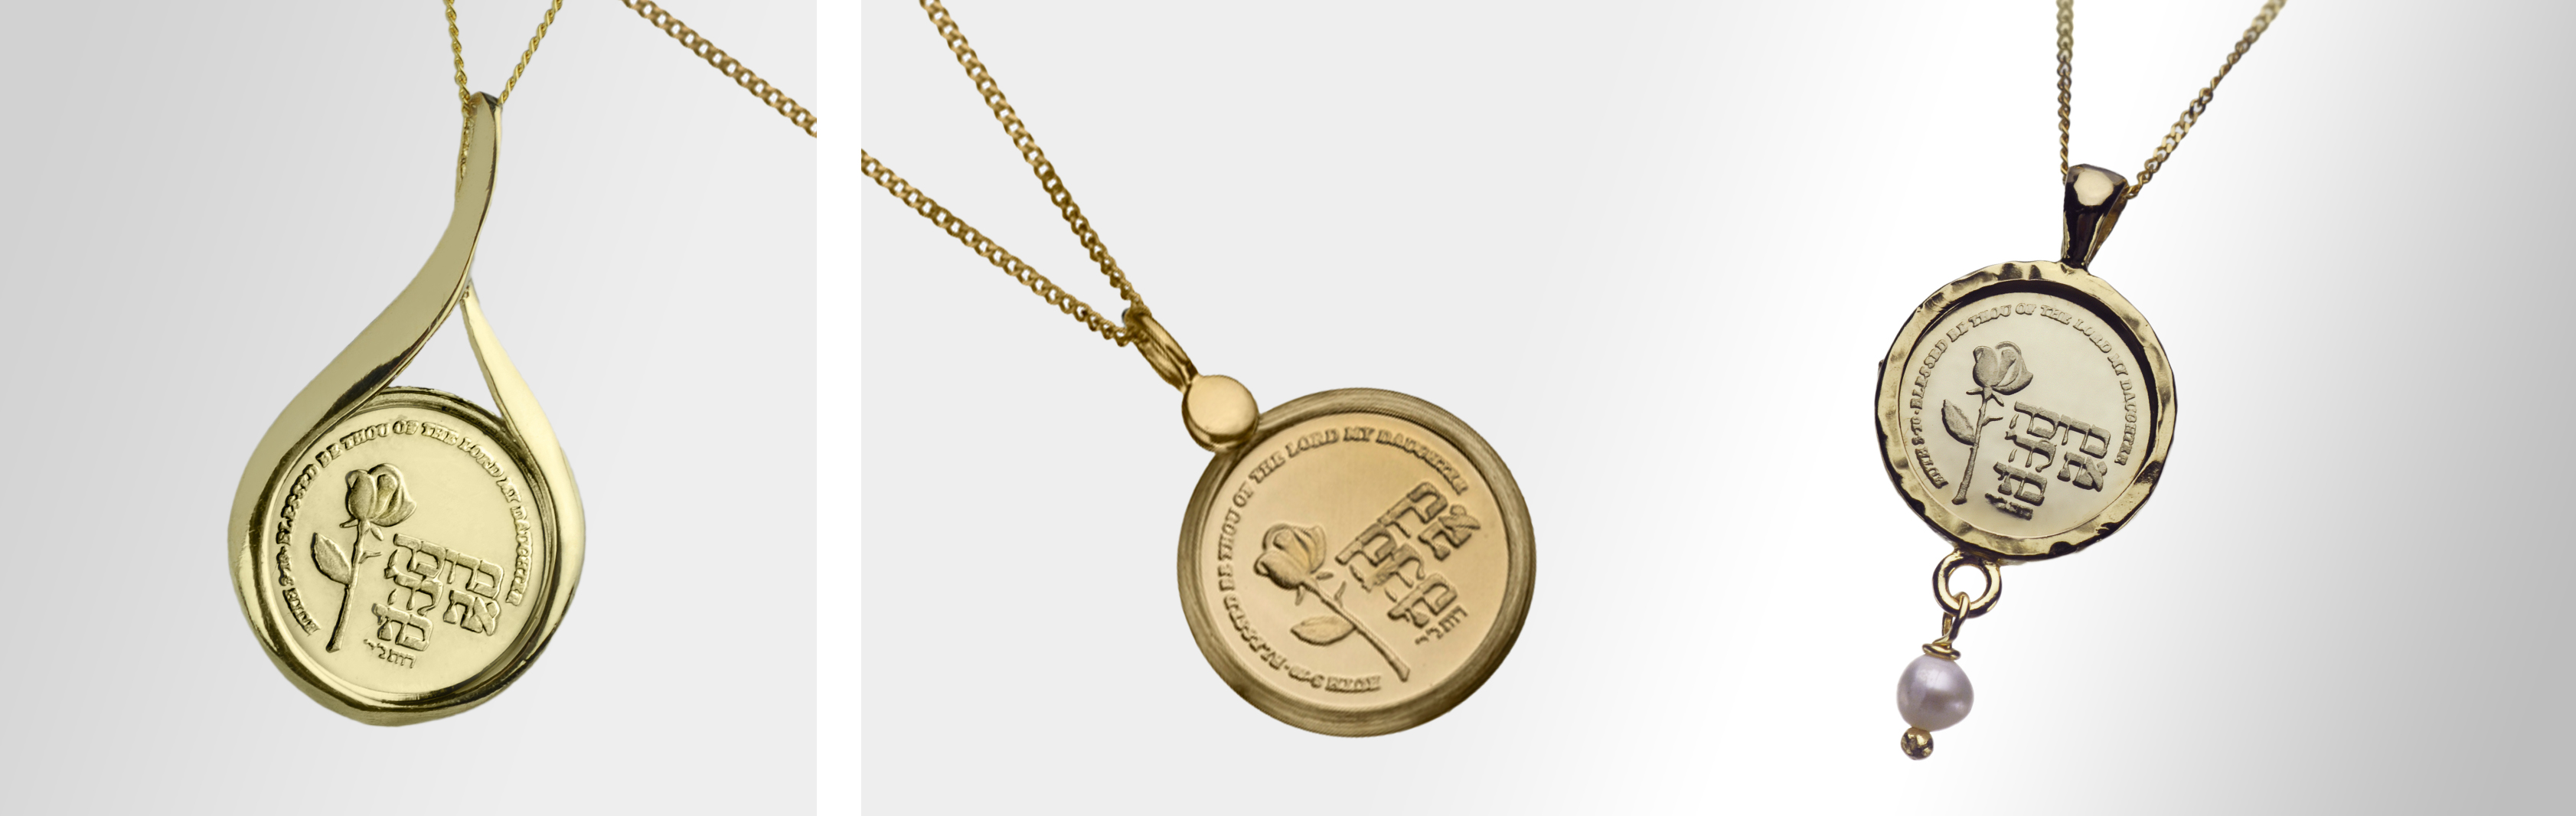 A Daughter's Blessing Adillion | State Medal set in 14K Gold Jewelry